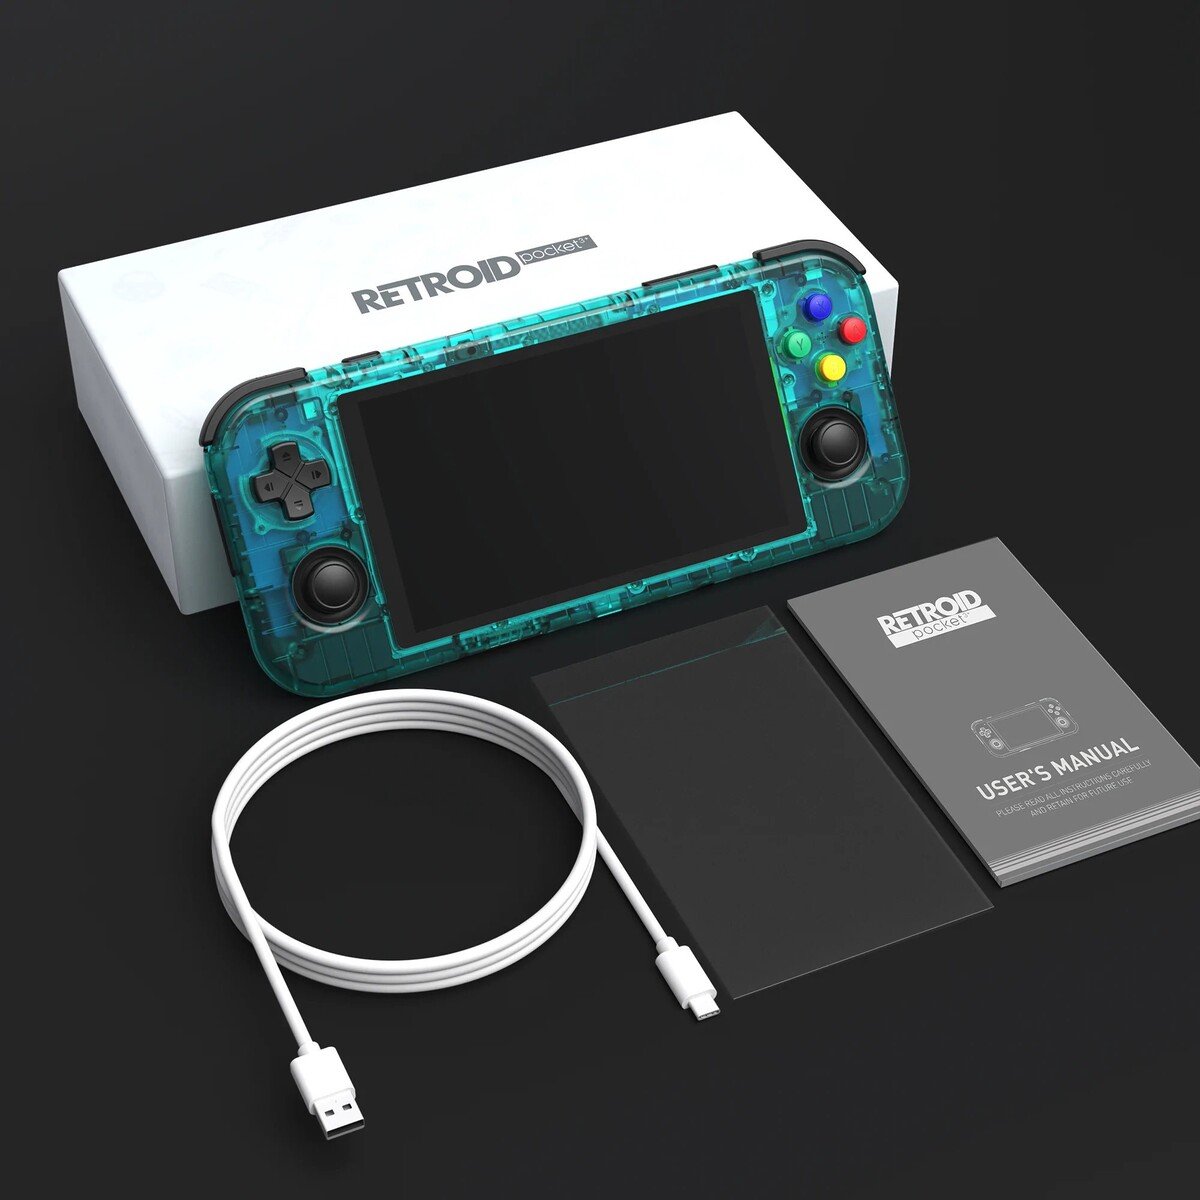 Retroid Pocket 3+ Handheld Retro Gaming console launched with $149